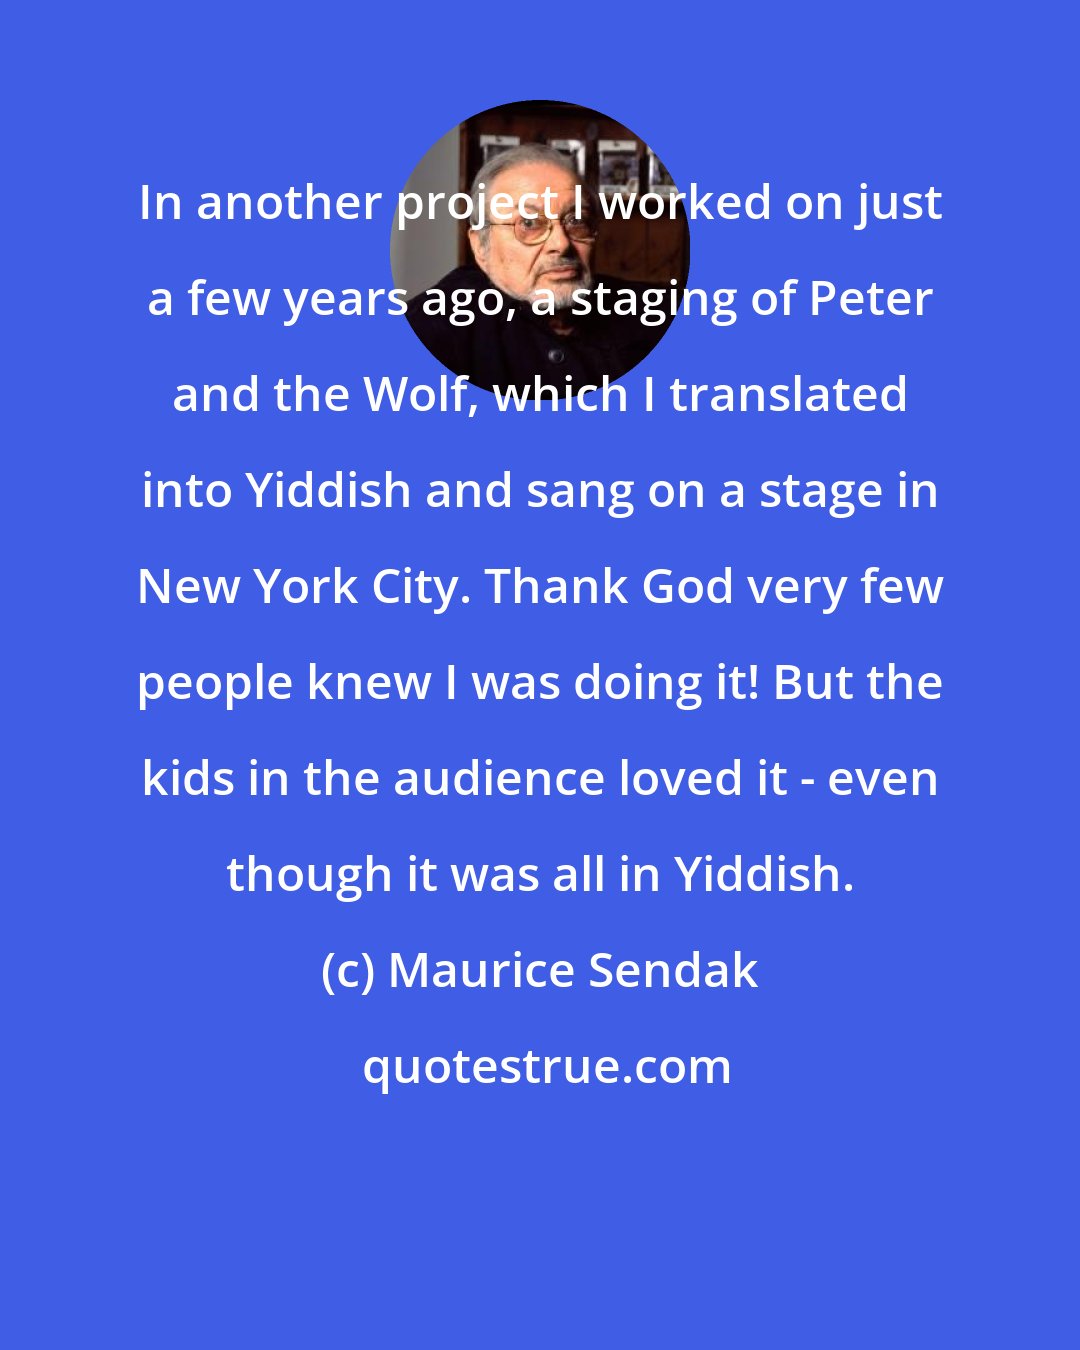 Maurice Sendak: In another project I worked on just a few years ago, a staging of Peter and the Wolf, which I translated into Yiddish and sang on a stage in New York City. Thank God very few people knew I was doing it! But the kids in the audience loved it - even though it was all in Yiddish.